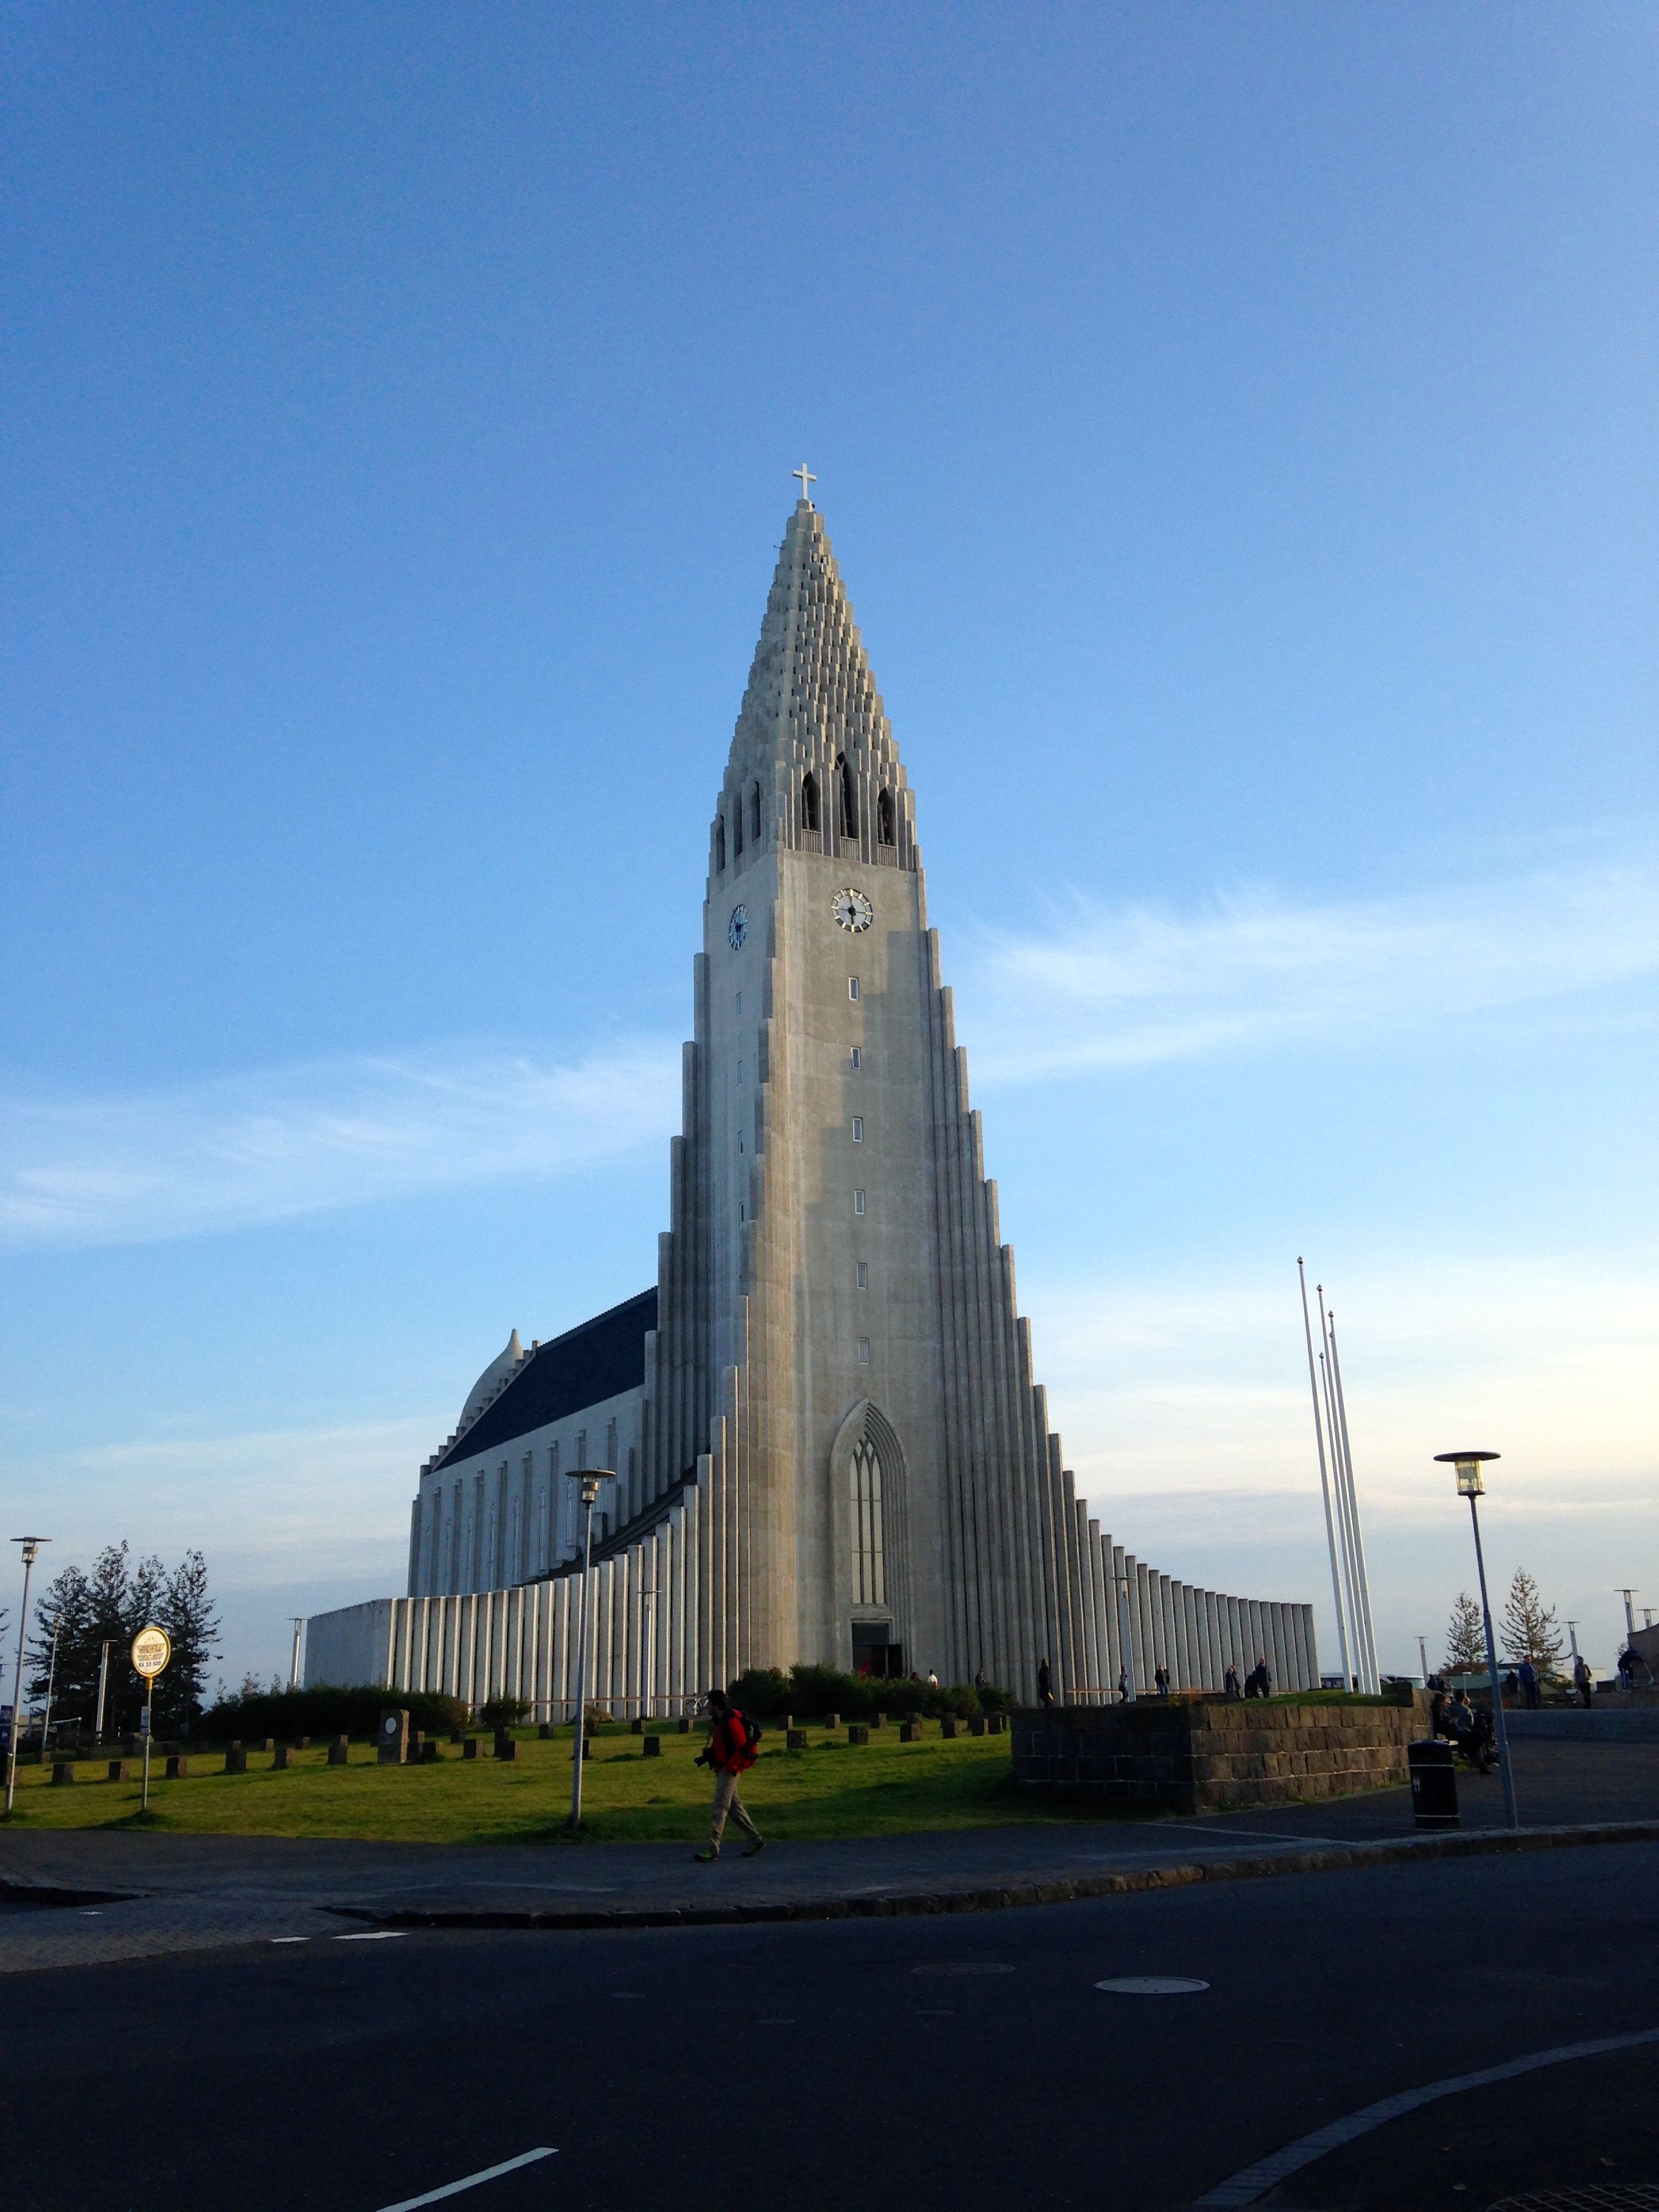 Reykjavik, Iceland. Hallgrímskirkja is a Lutheran parish church, is the largest church in Iceland and among the tallest structures in Iceland.